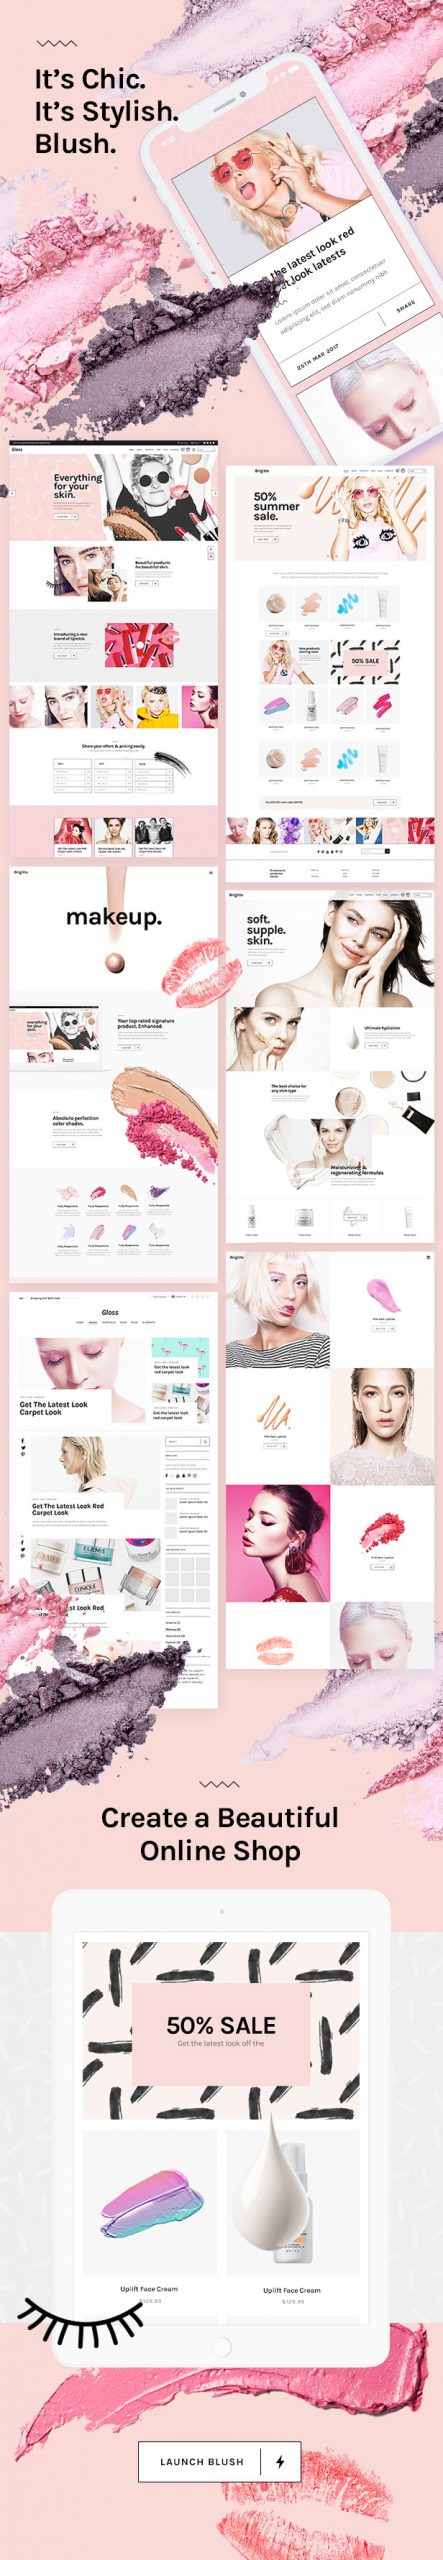 Blush - A Trendy Beauty and Lifestyle Theme - 1